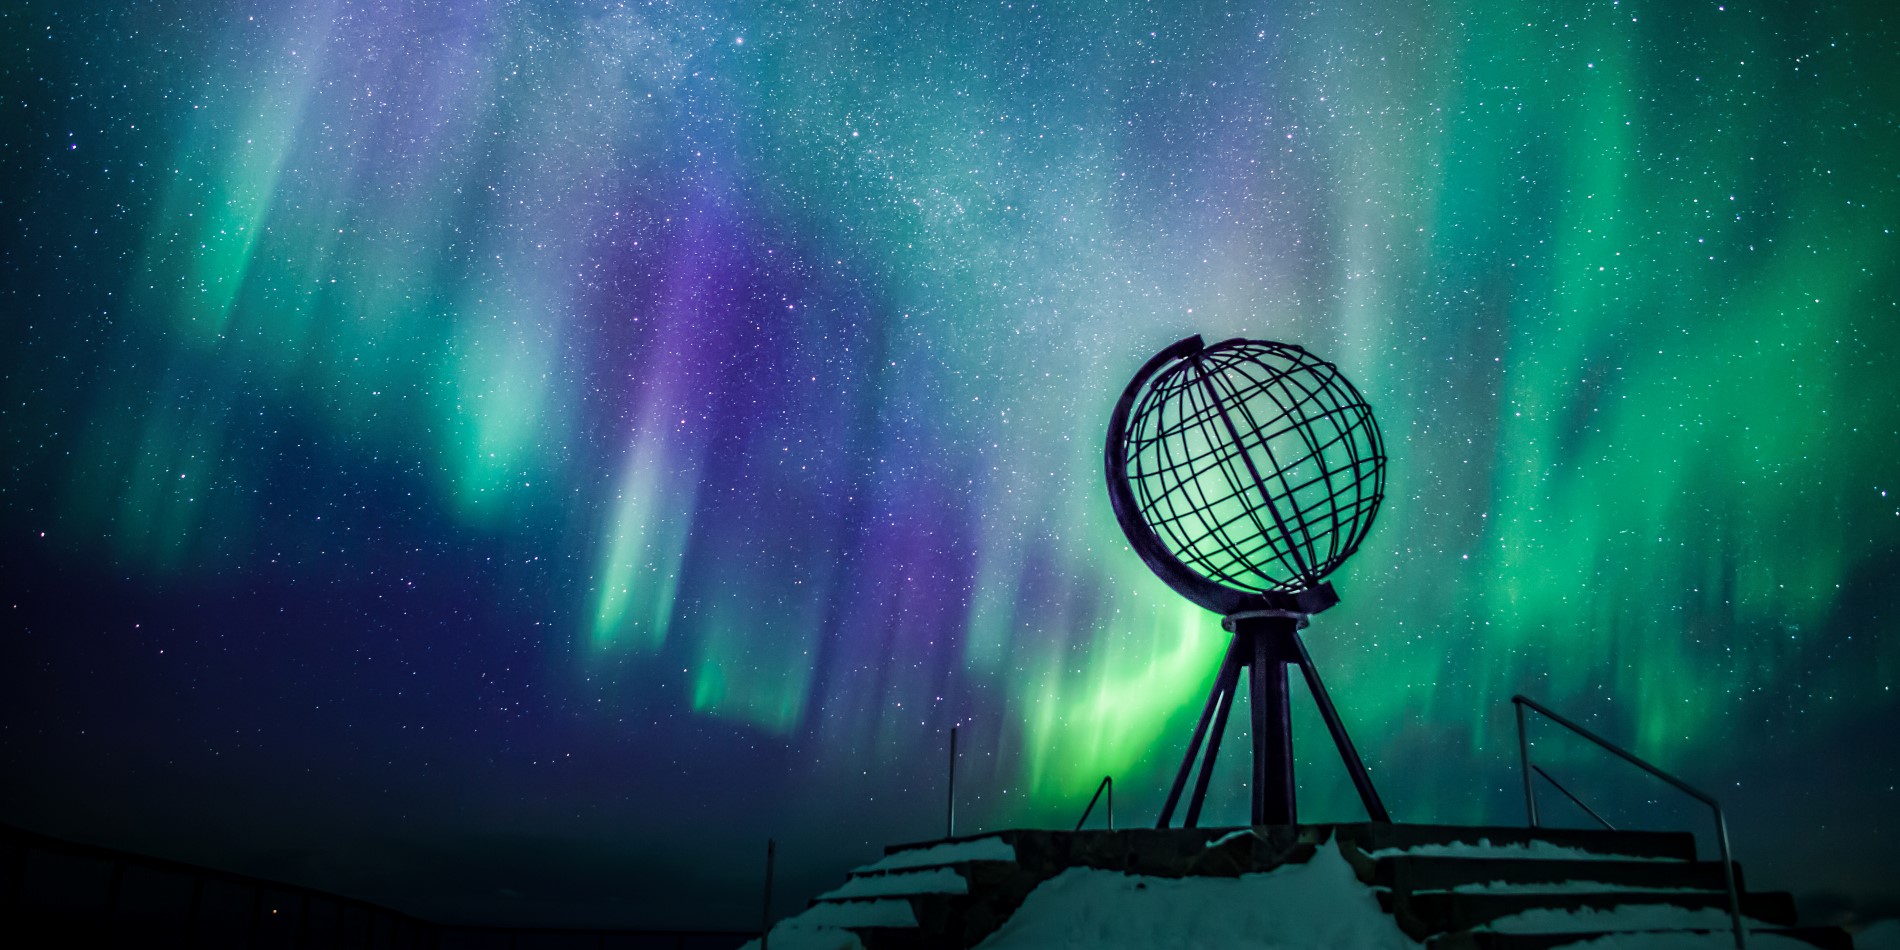 The globe statue on The North Cape surrounded by northern lights